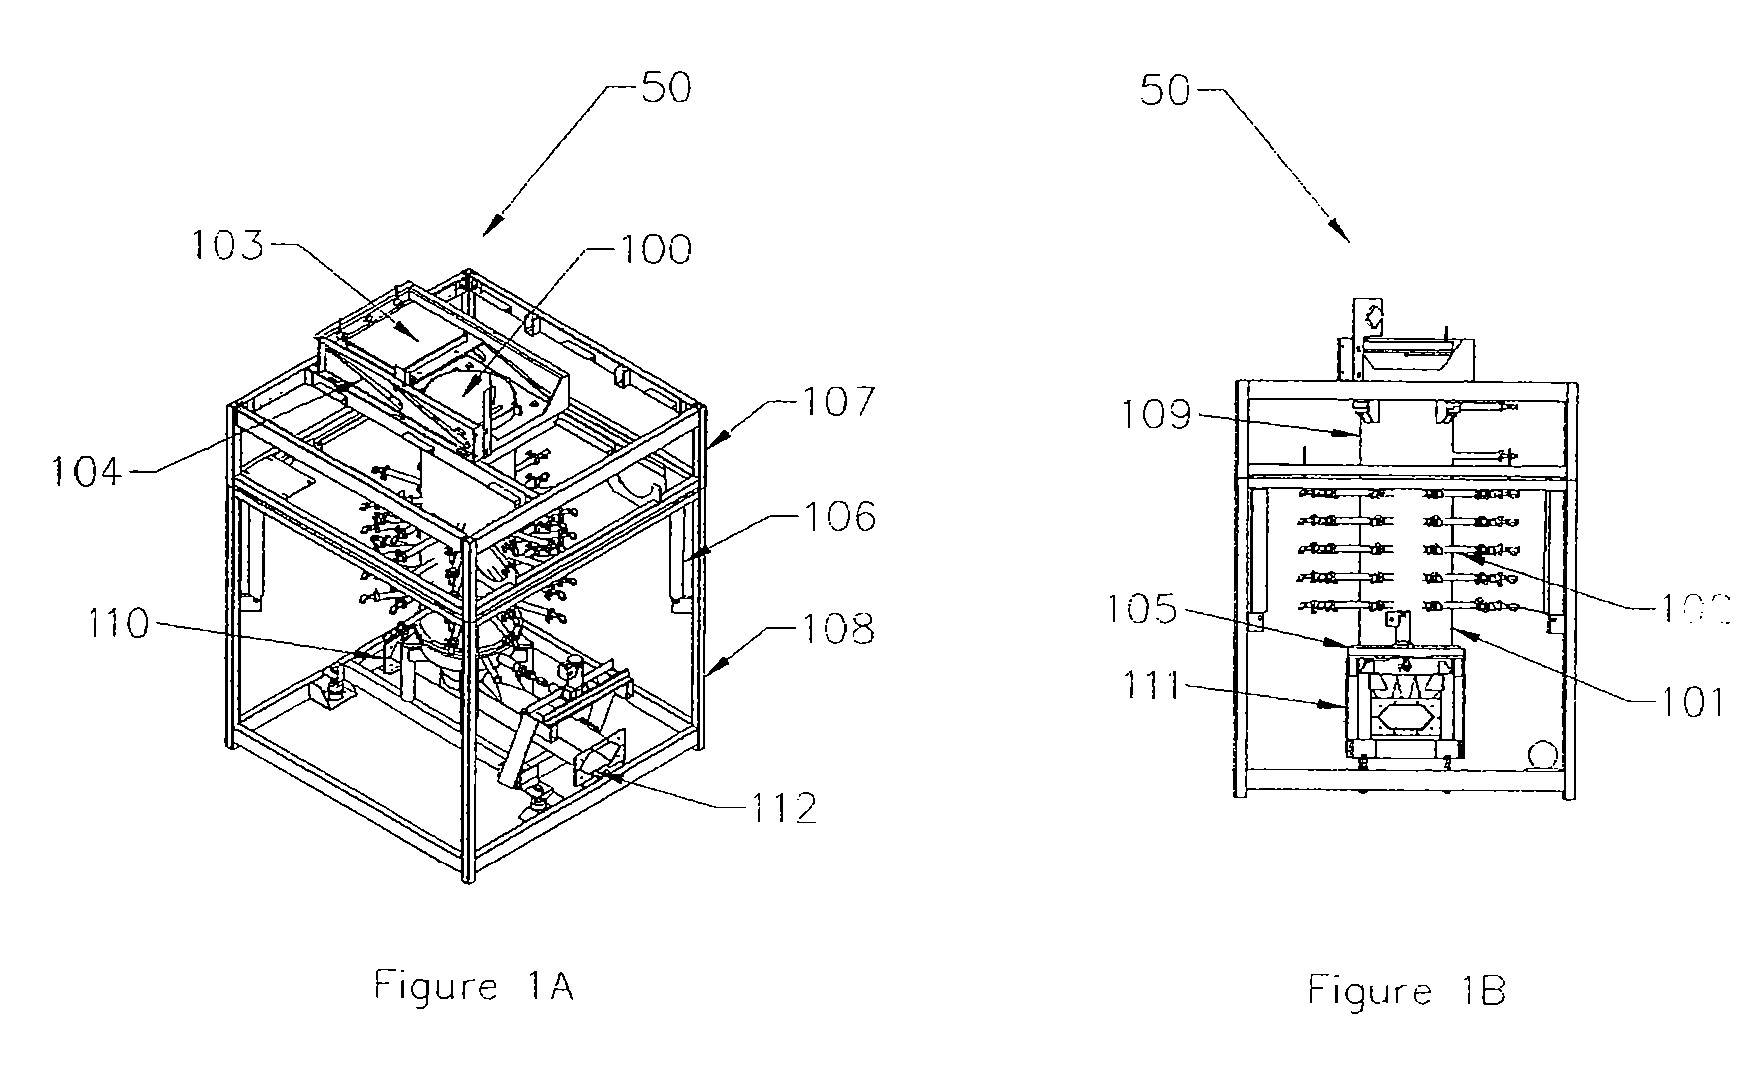 Method and Apparatus for Automated, Modular, Biomass Power Generation